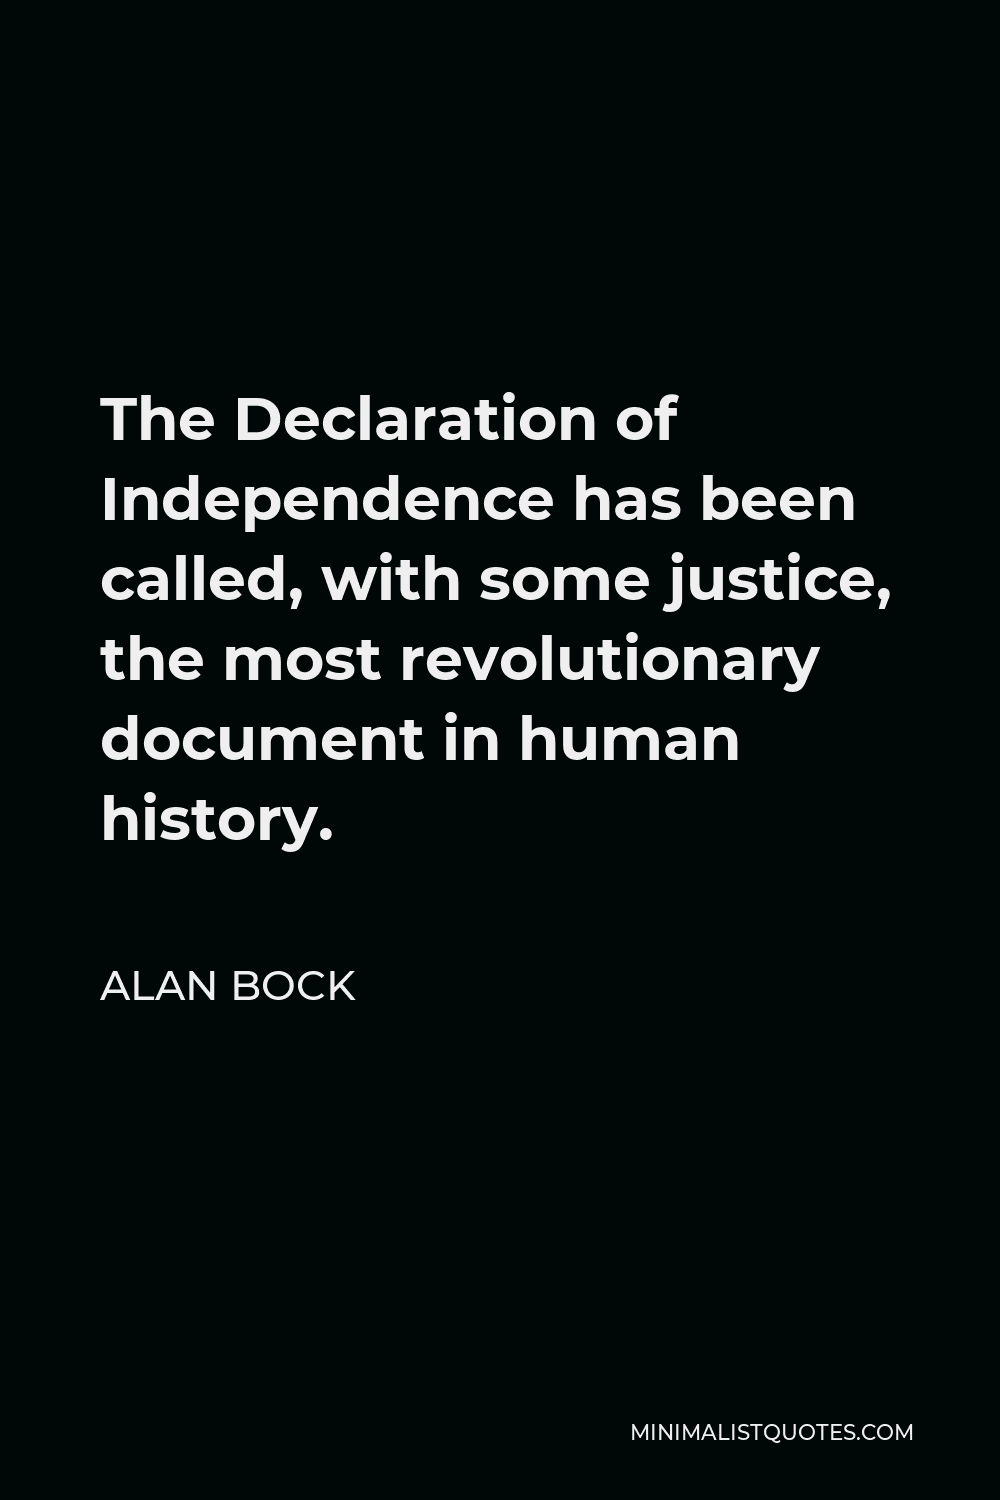 Alan Bock Quote - The Declaration of Independence has been called, with some justice, the most revolutionary document in human history.